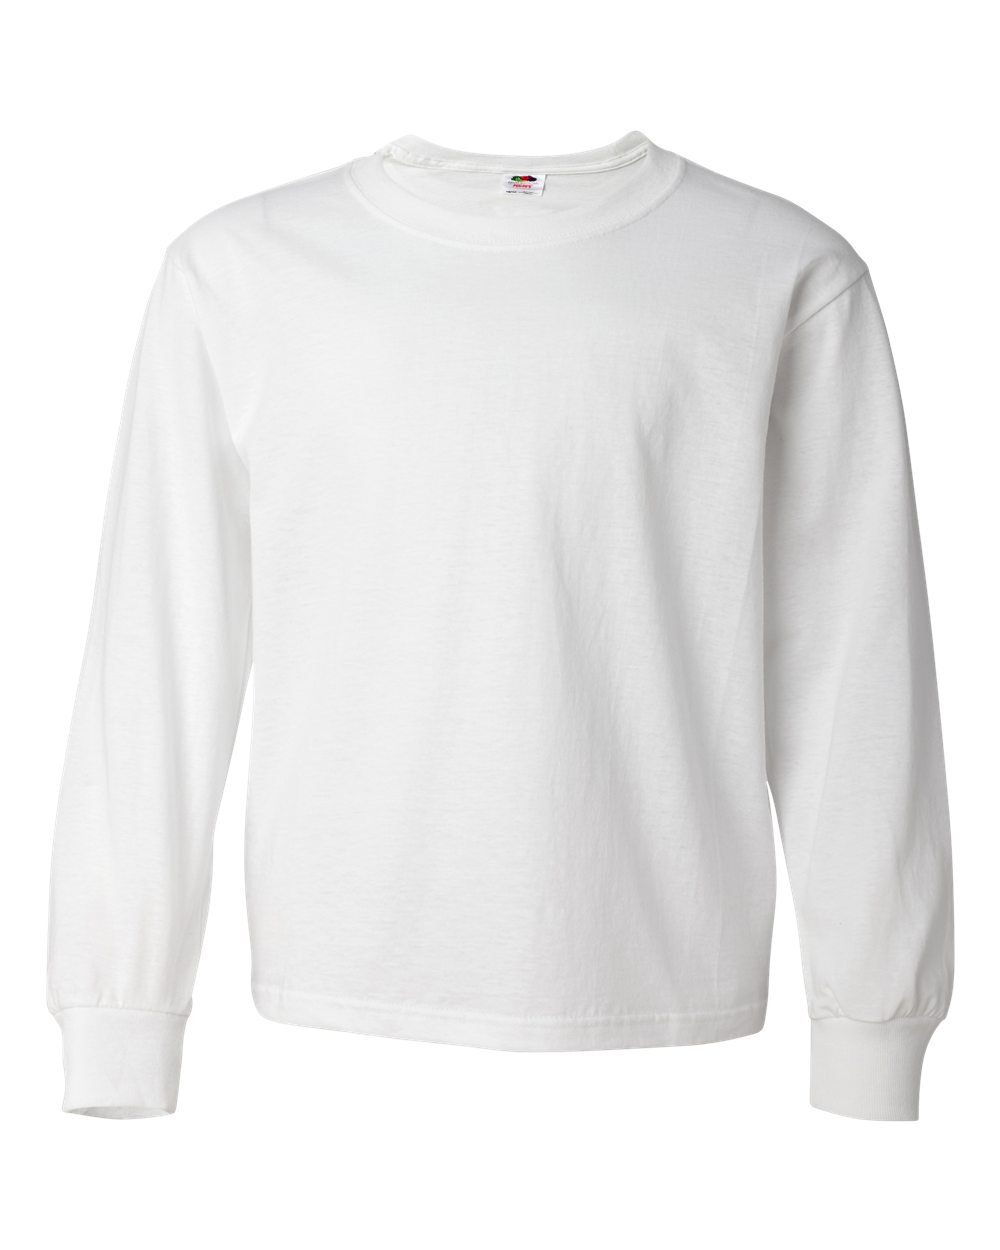 HD Cotton Youth Long Sleeve T-Shirt - 4930BR-